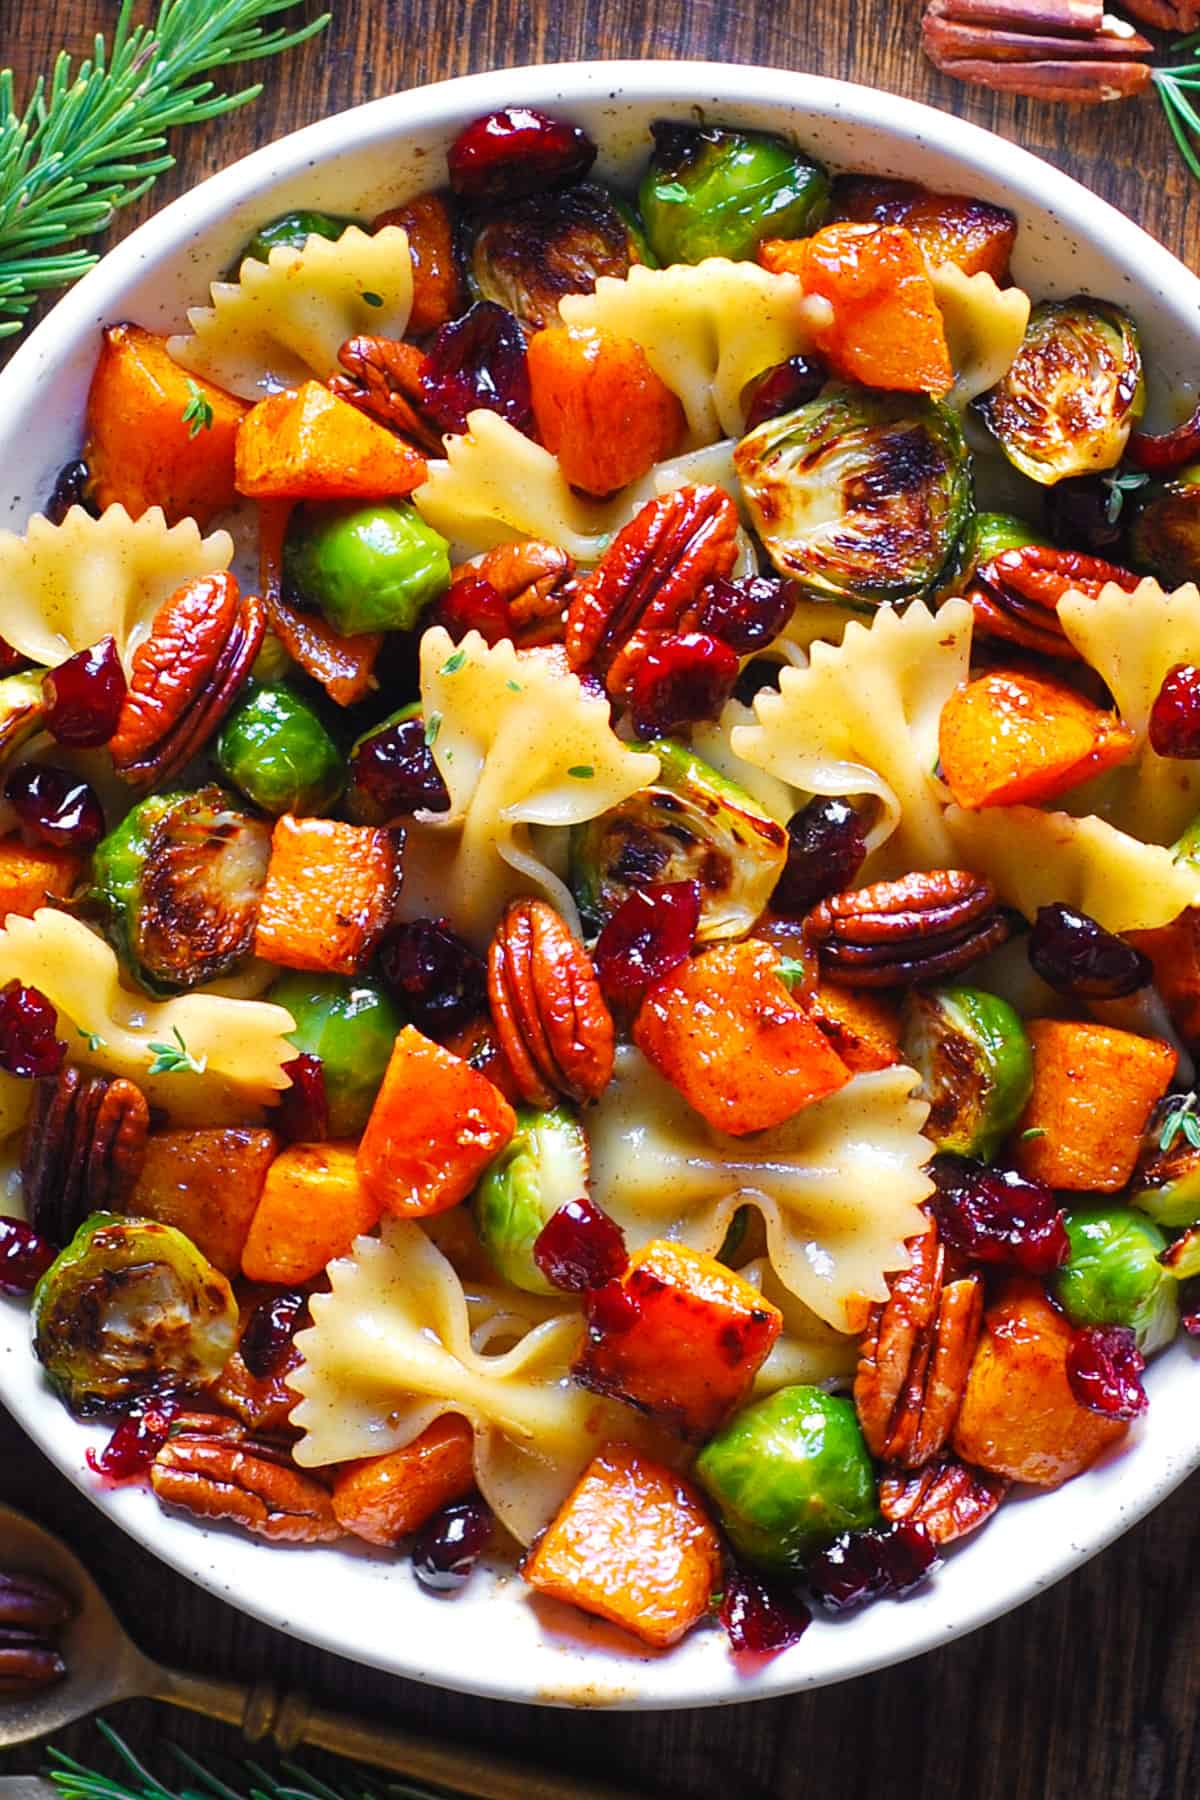 Butternut Squash Pasta Salad with Brussels Sprouts, Pecans, and Cranberries in a white bowl.